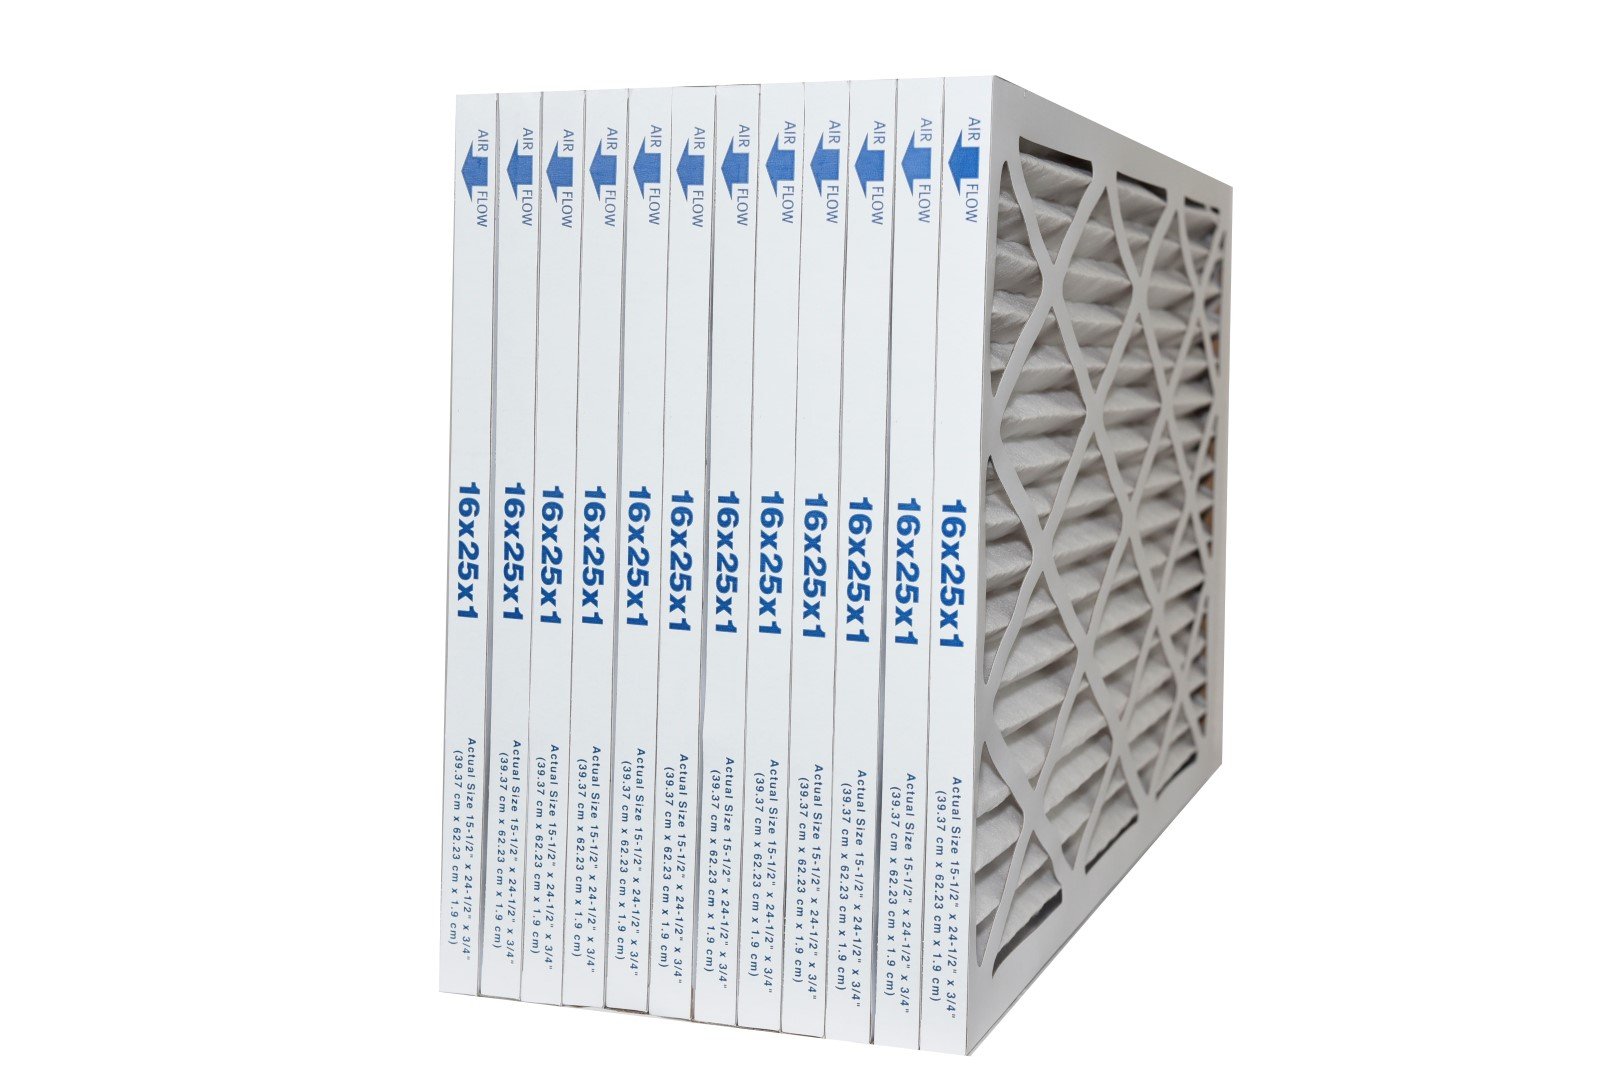 16 x 25 x 1 Pleated Filters. MERV 8 Rated. Case of 12 Made in Canada by Furnace Filters.Ca